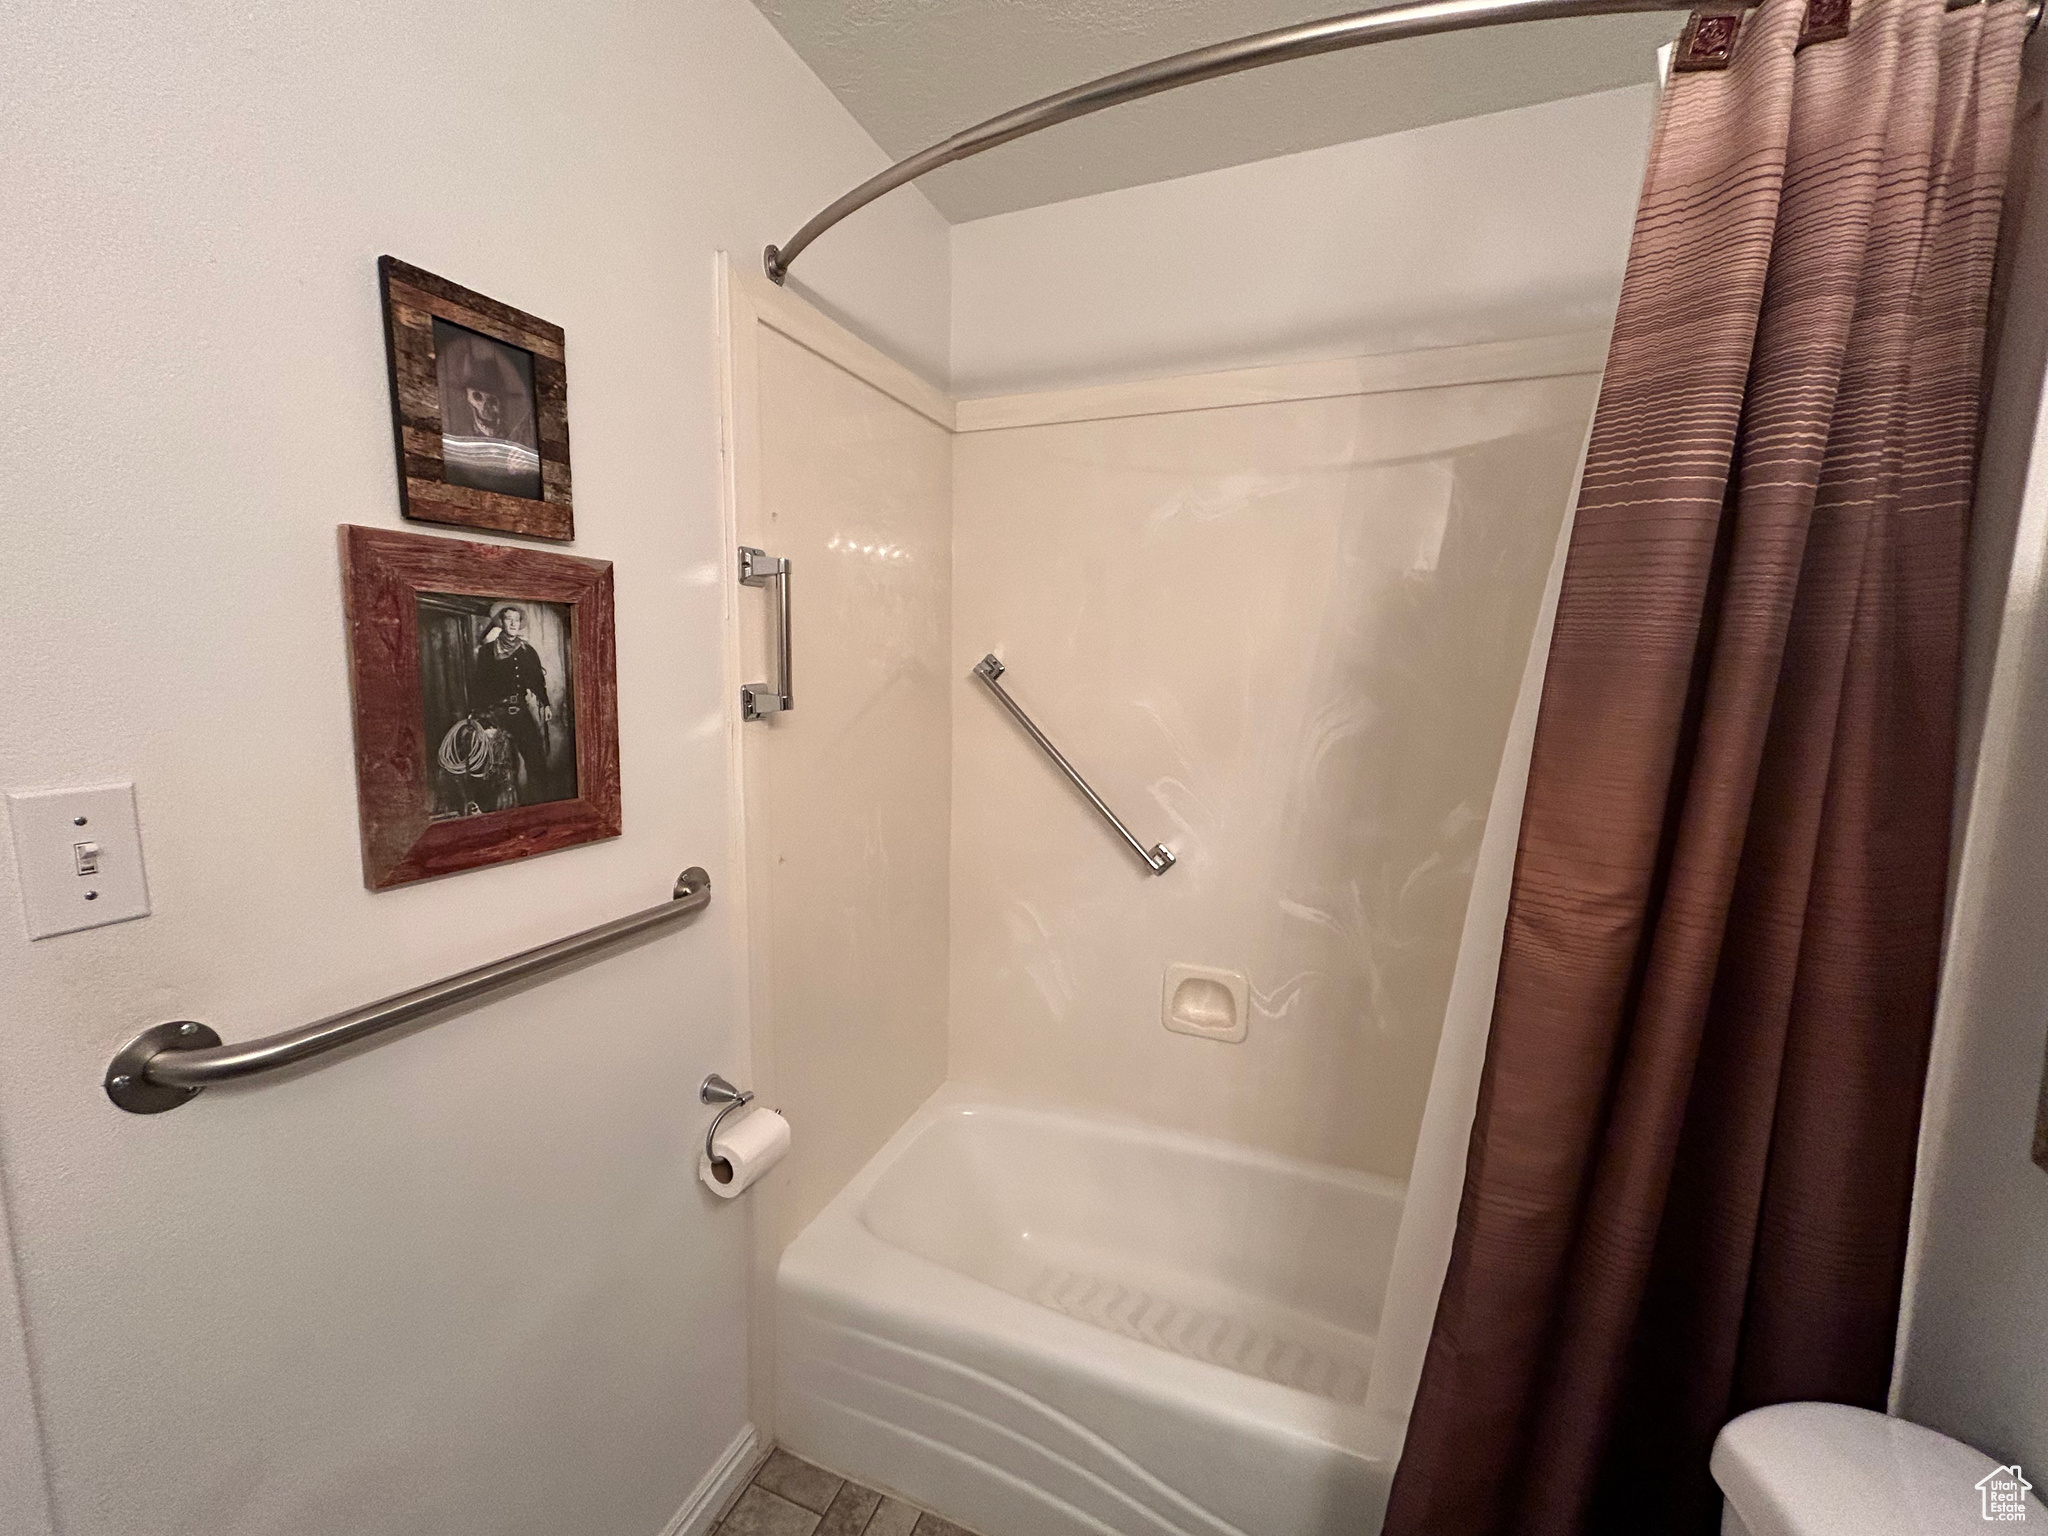 Bathroom featuring tile floors, shower / bath combination with curtain, and toilet